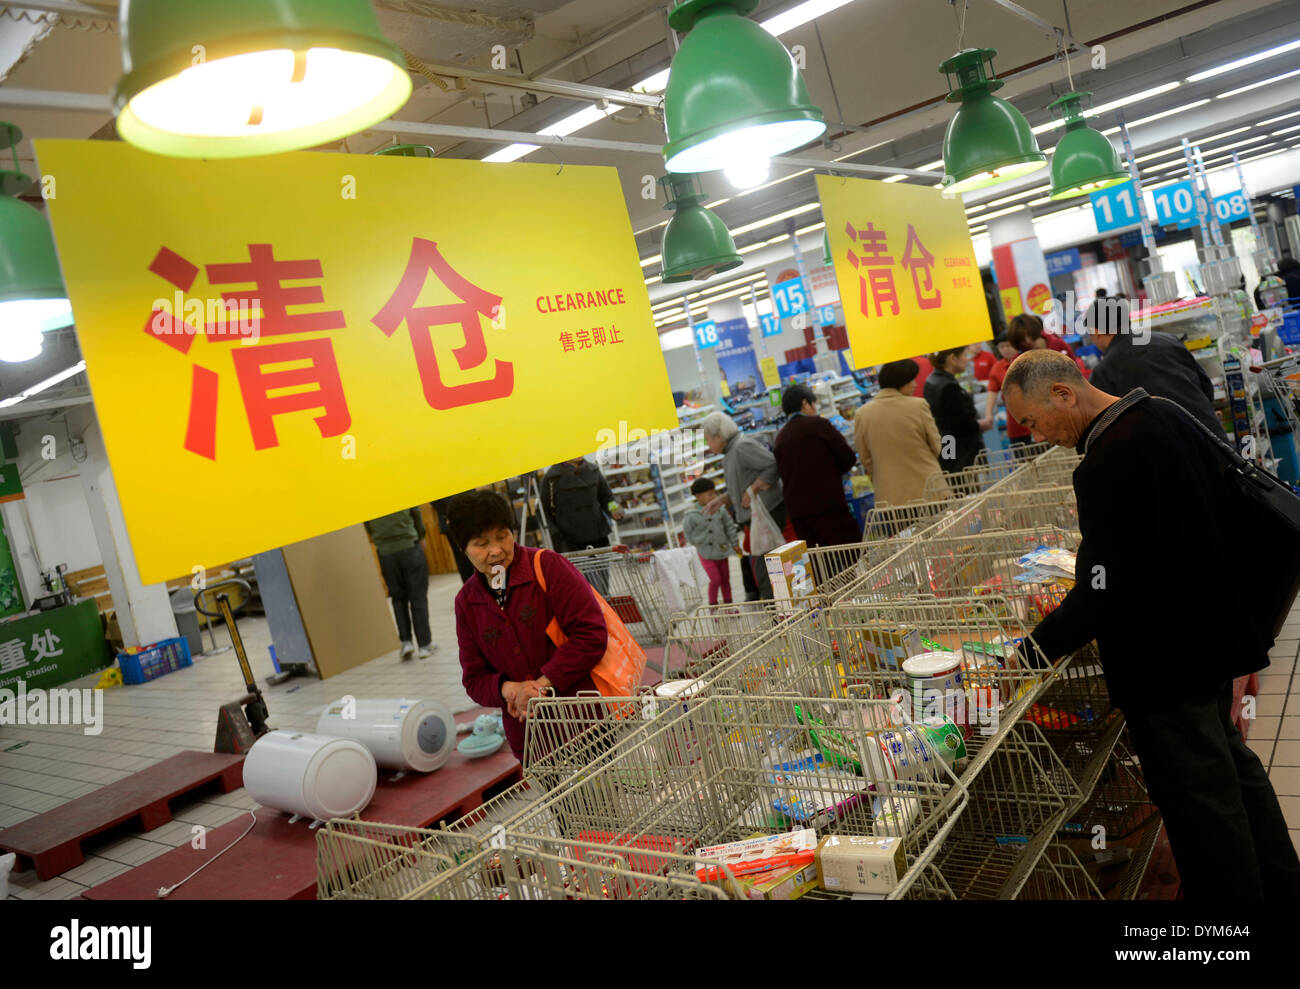 Hangzhou, China's Zhejiang Province. 22nd Apr, 2014. Residents select goods in the Zhaohui outlet of Walmart Stores which is to be closed in Hangzhou, capital of east China's Zhejiang Province, April 22, 2014. Walmart Stores, the world's largest retailer, decided to close the Zhaohui outlet in Hangzhou on April 23 due to its poor performance. © Han Chuanhao/Xinhua/Alamy Live News Stock Photo